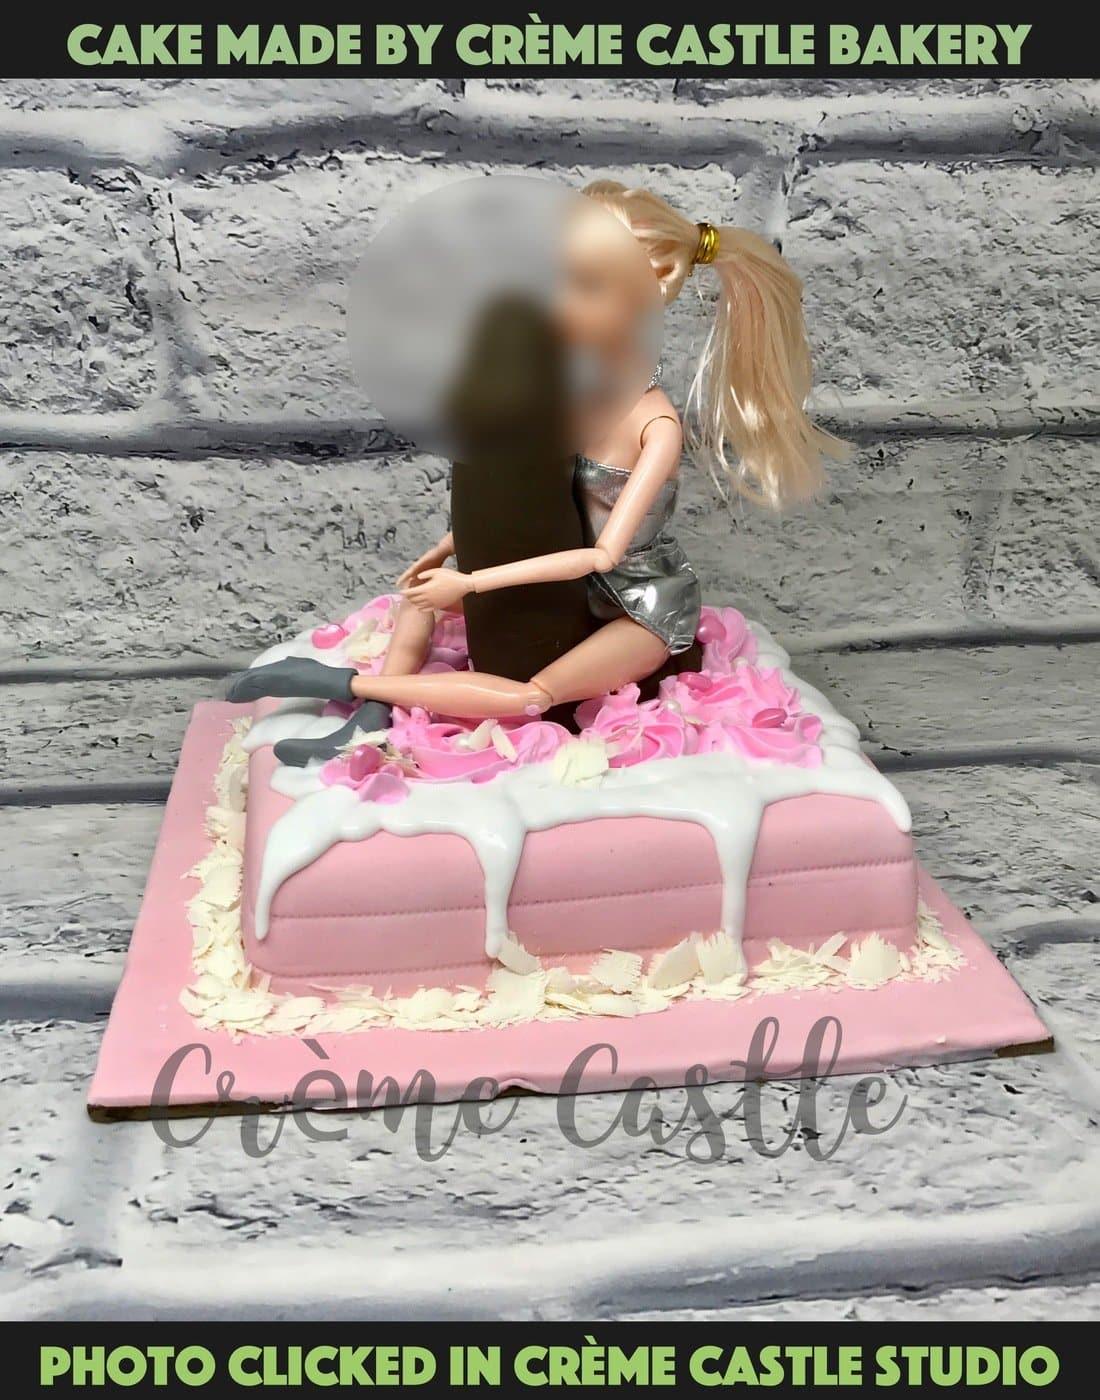 Wrapping Girl Adult Cake - Creme Castle